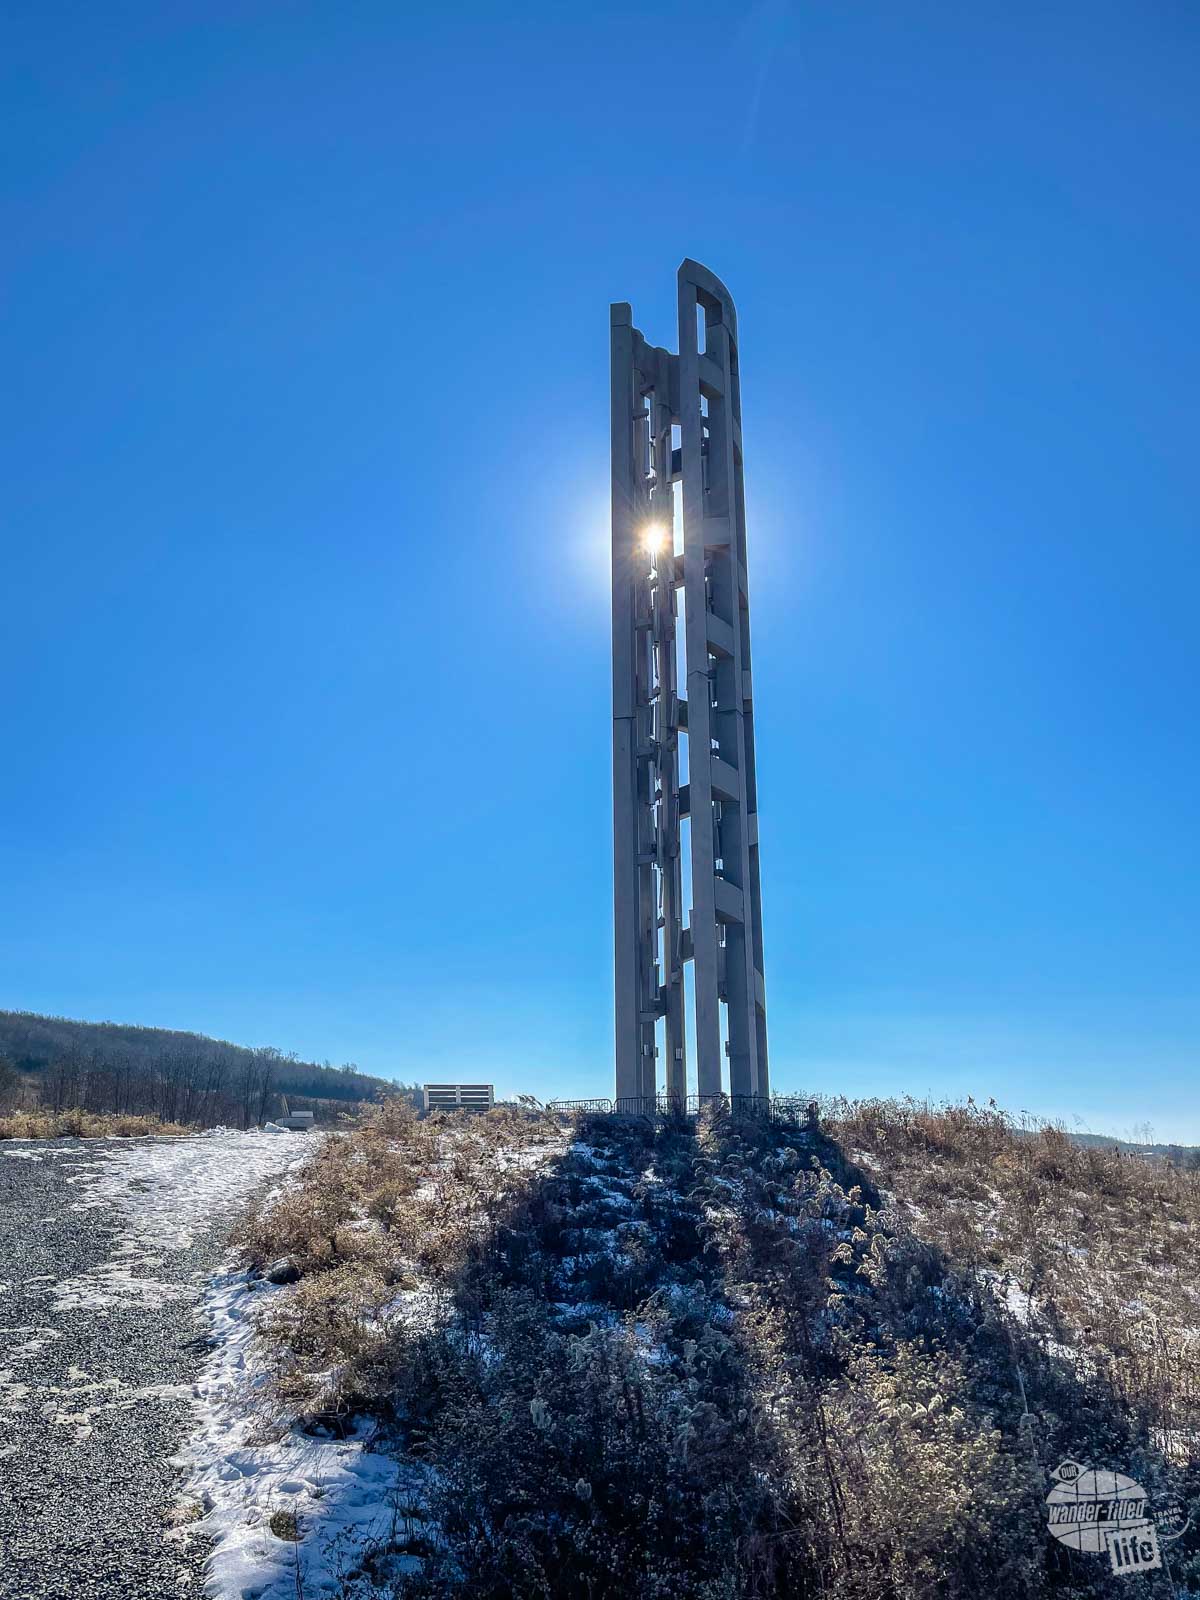 The Tower of Voices at the Flight 93 National Memorial, one of the Western Pennsylvania National Parks